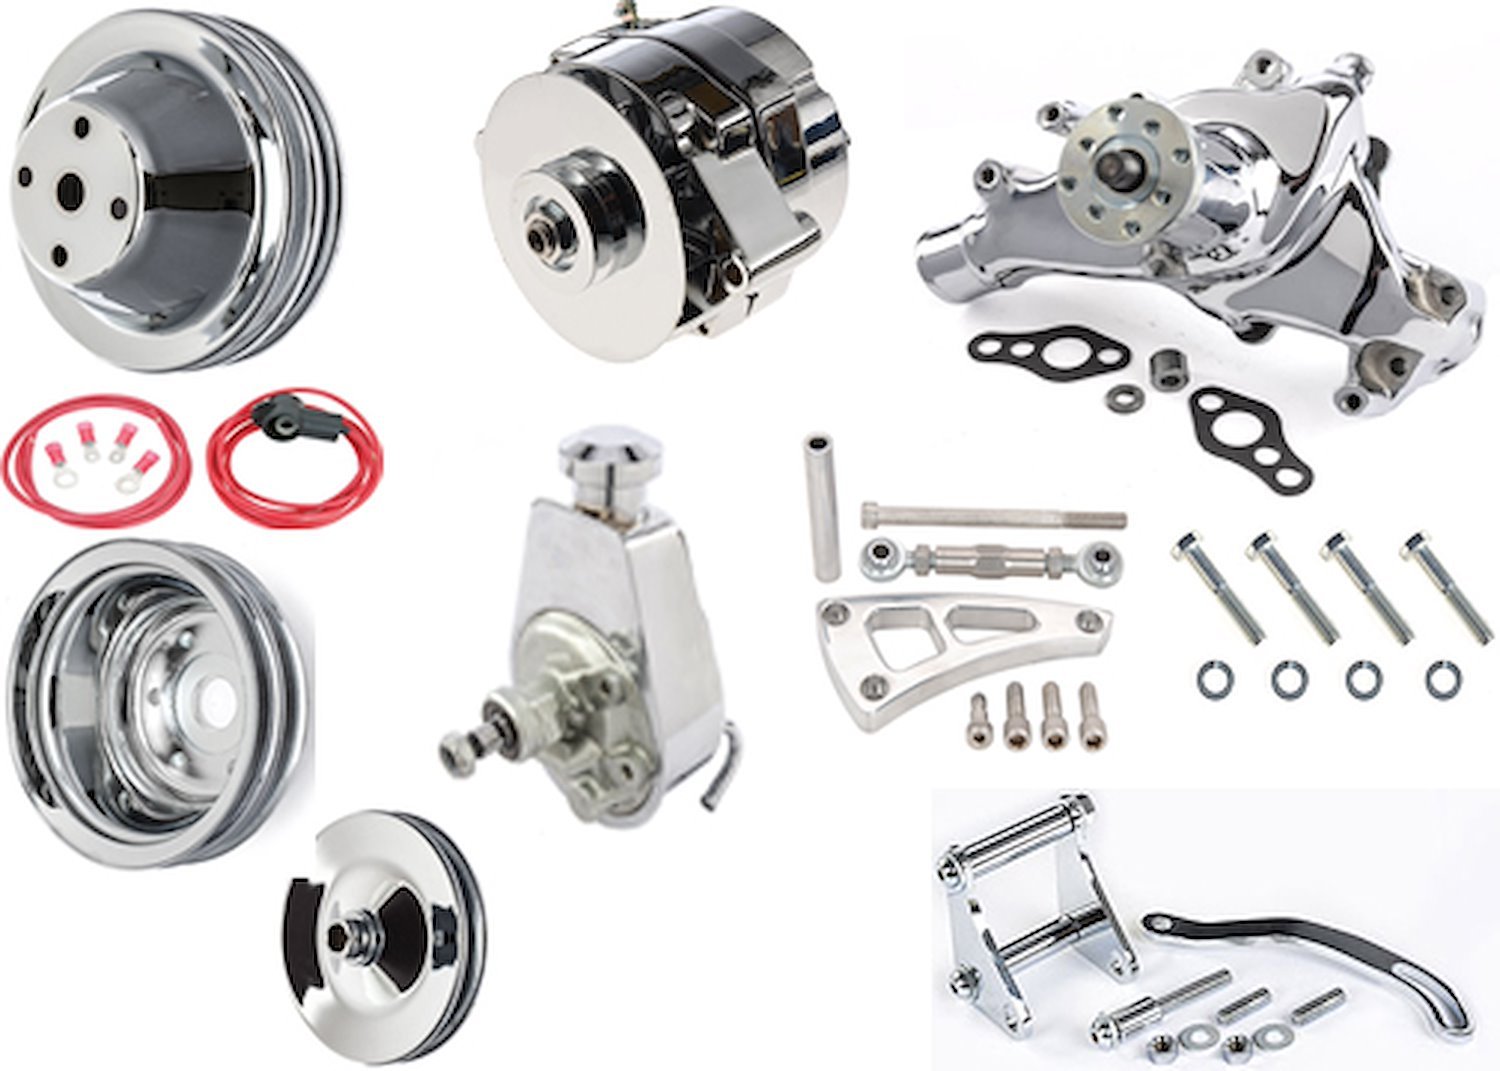 Drive Kit for 1969-1976 Small Block Chevy